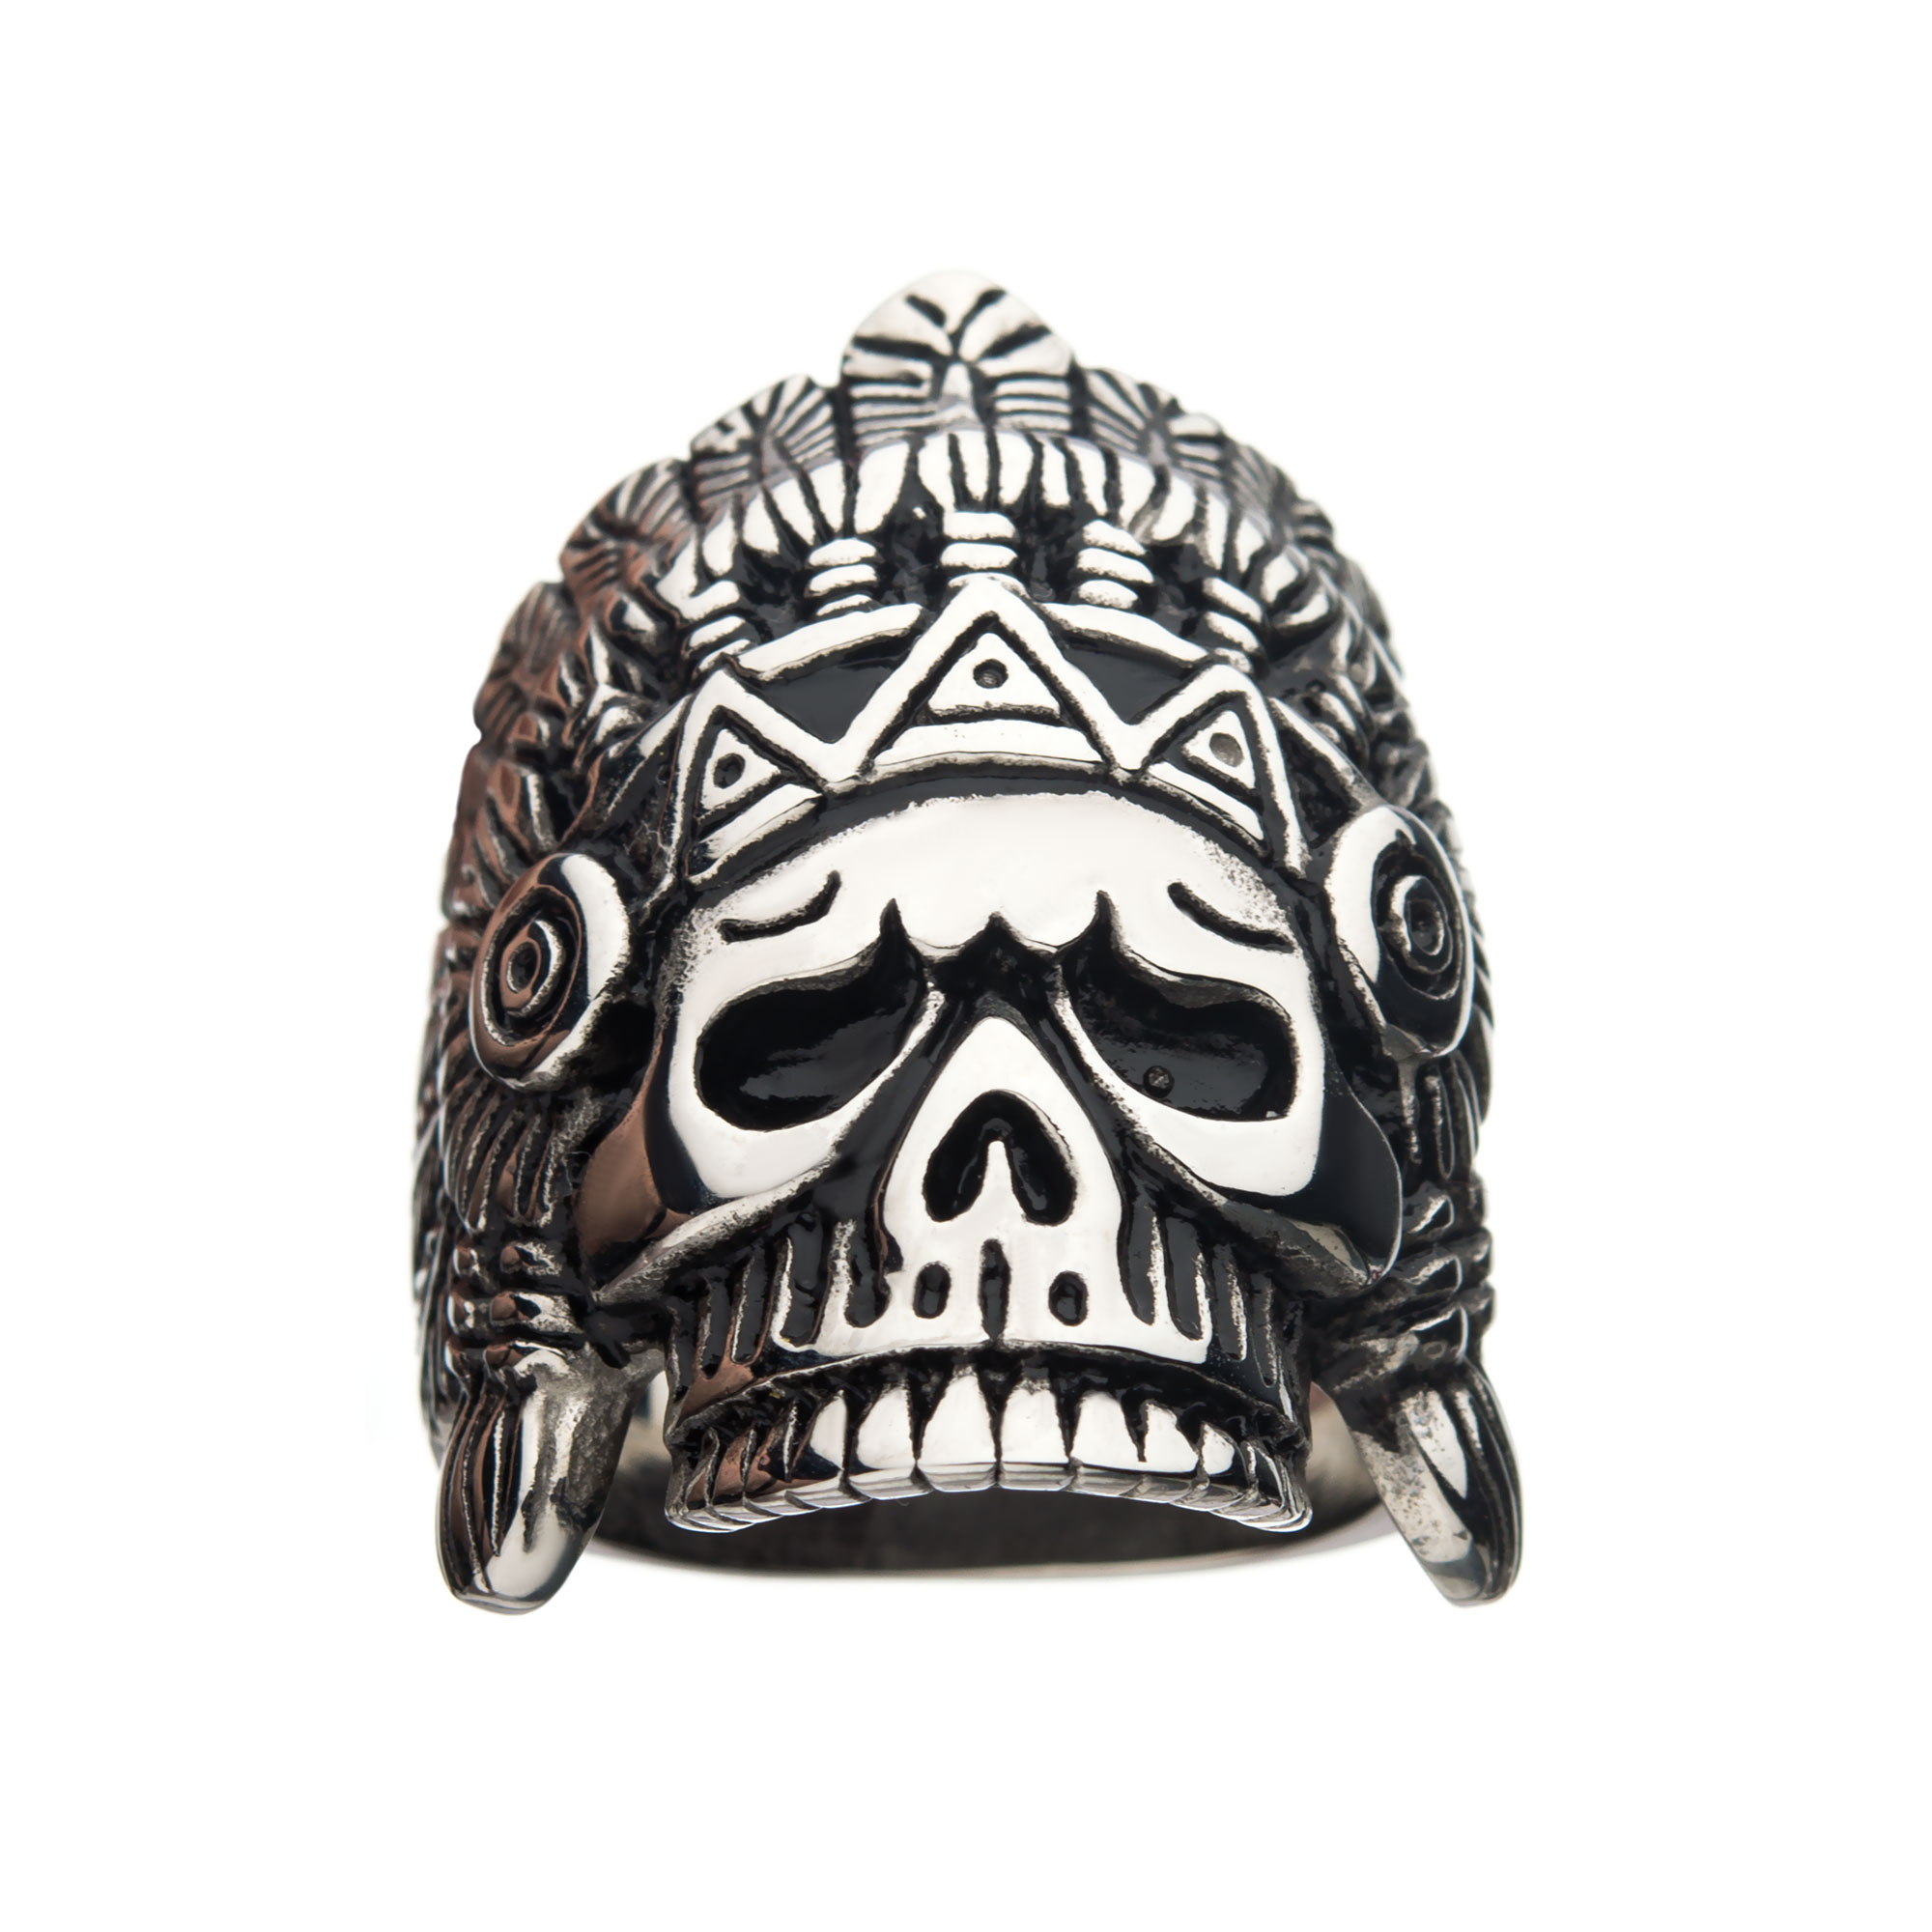 Oxidized Stainless Steel Chief Skull Ring Image 2 Ken Walker Jewelers Gig Harbor, WA